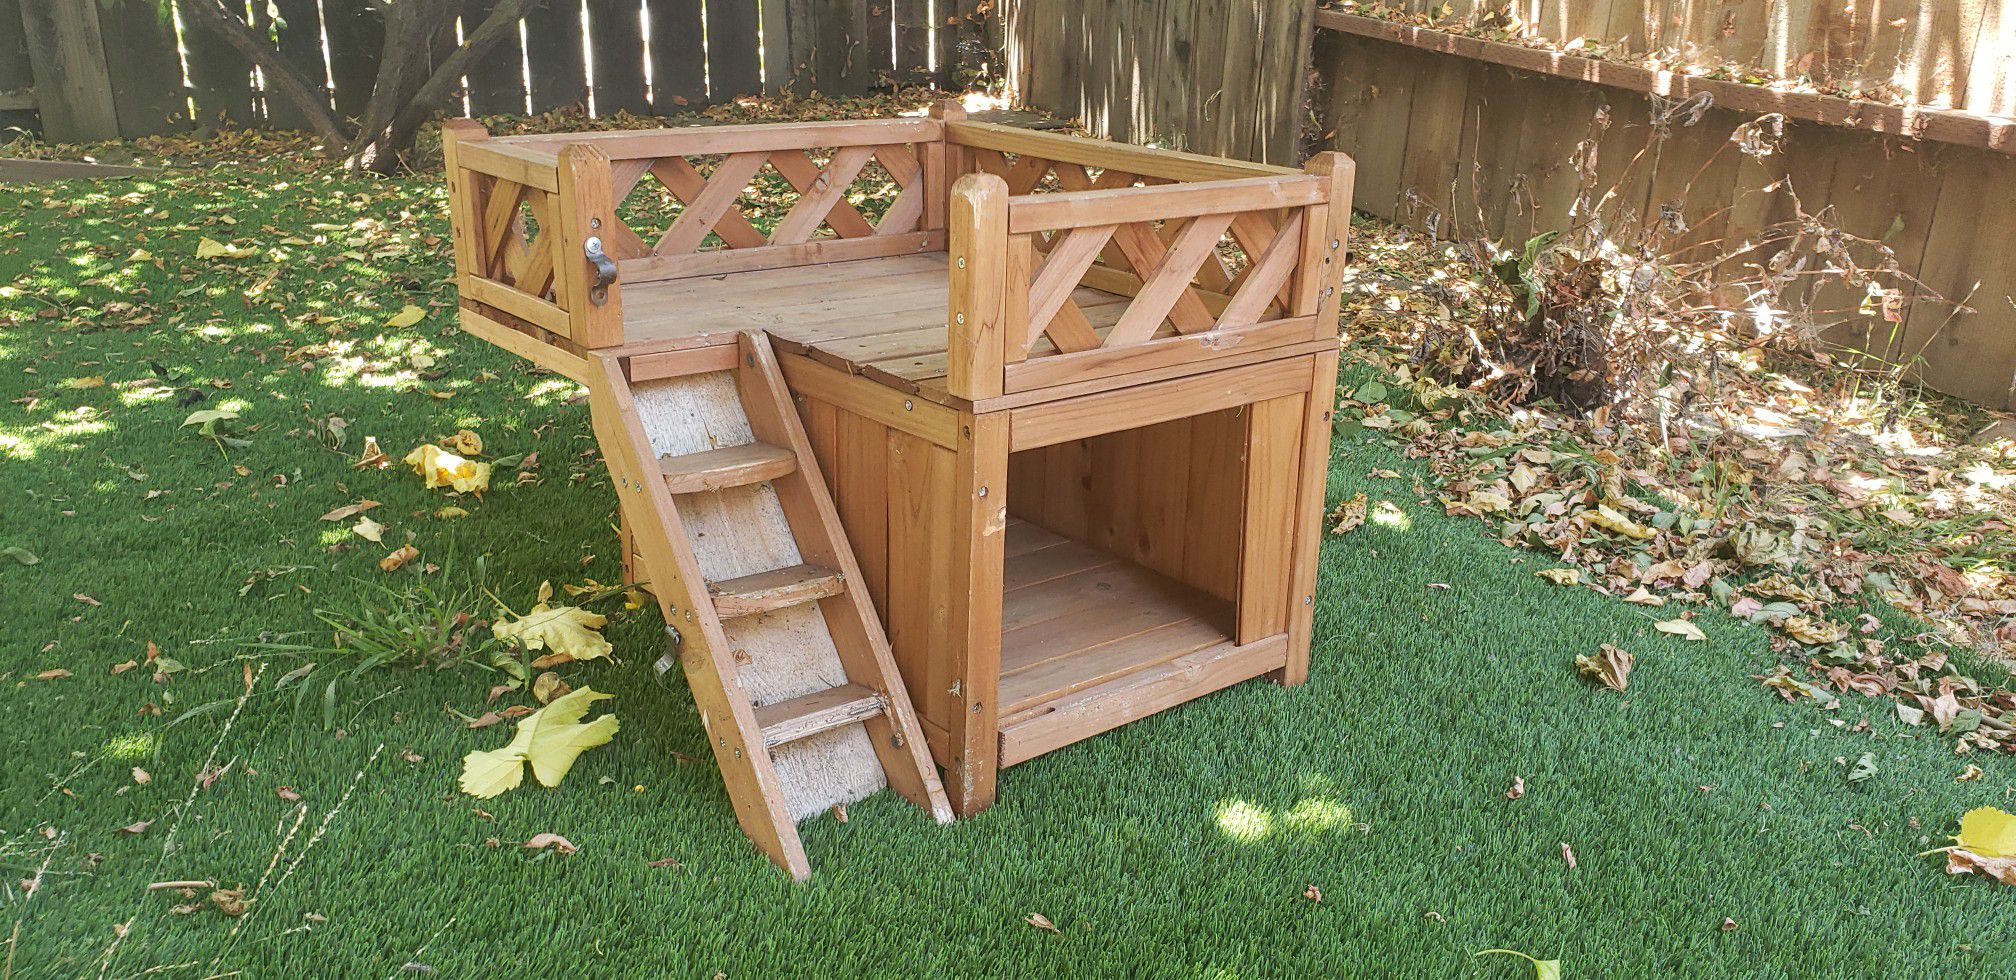 Small outdoor wood dog house